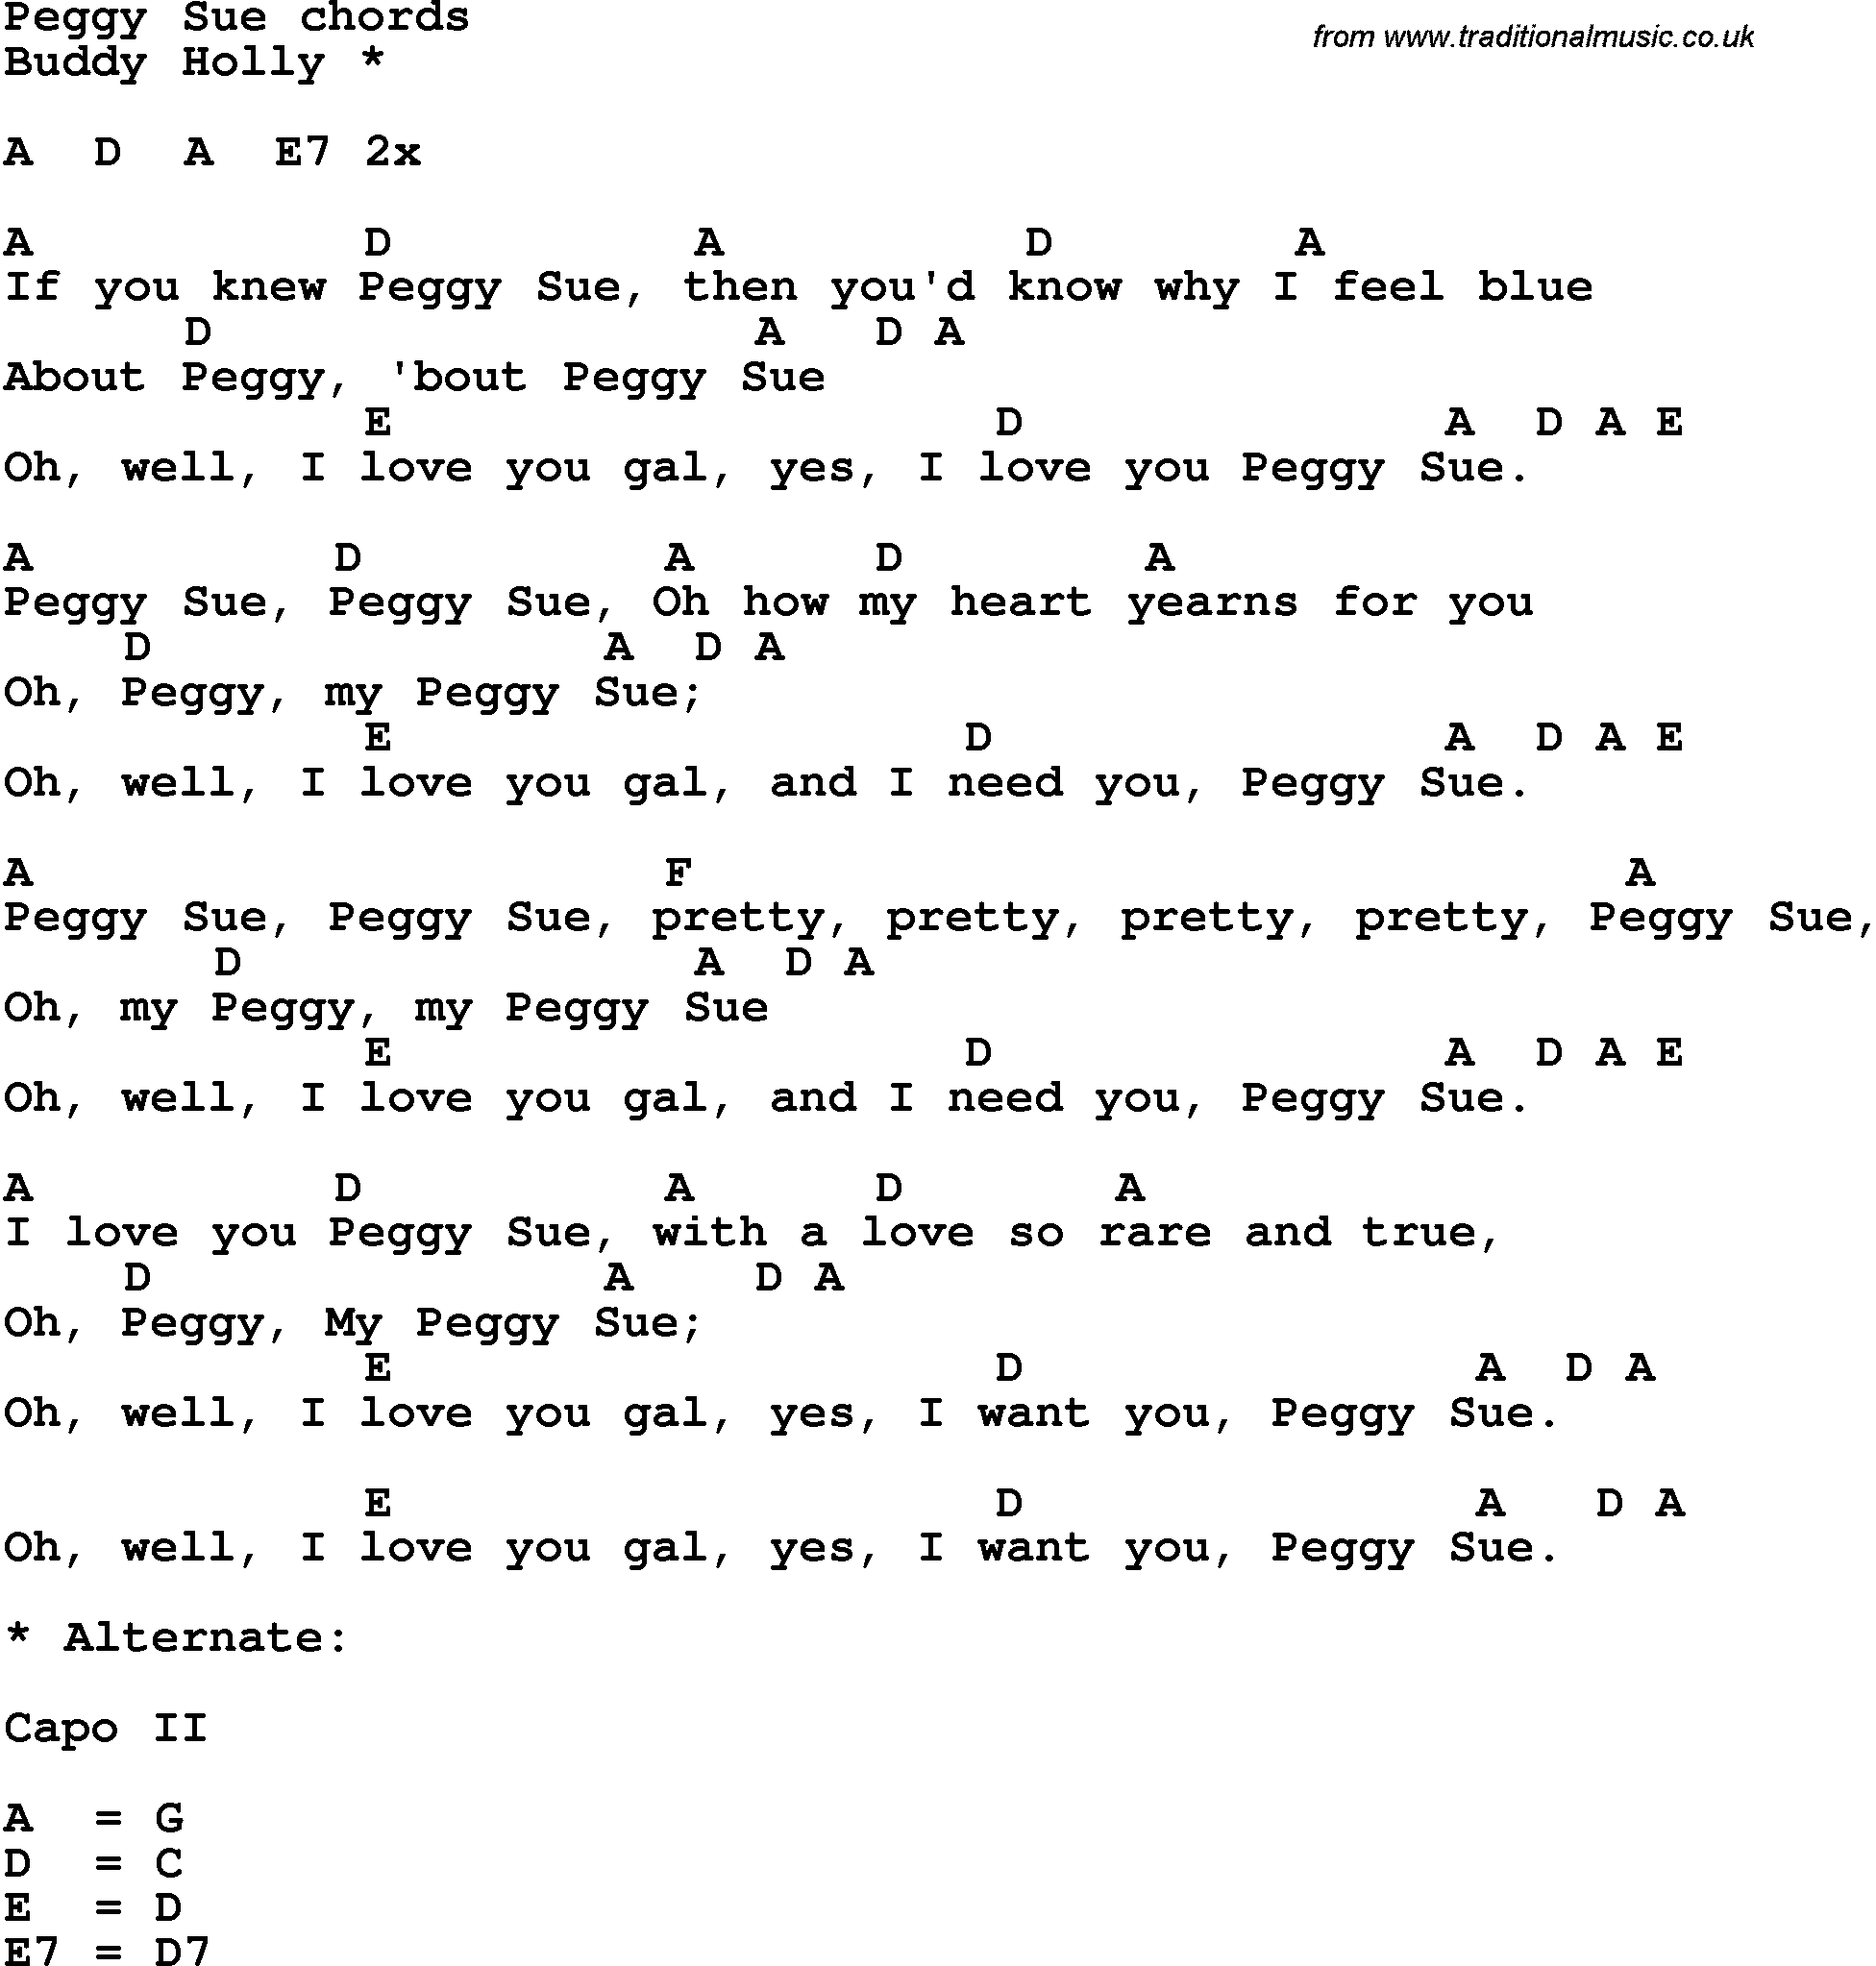 Song Lyrics with guitar chords for Peggy Sue